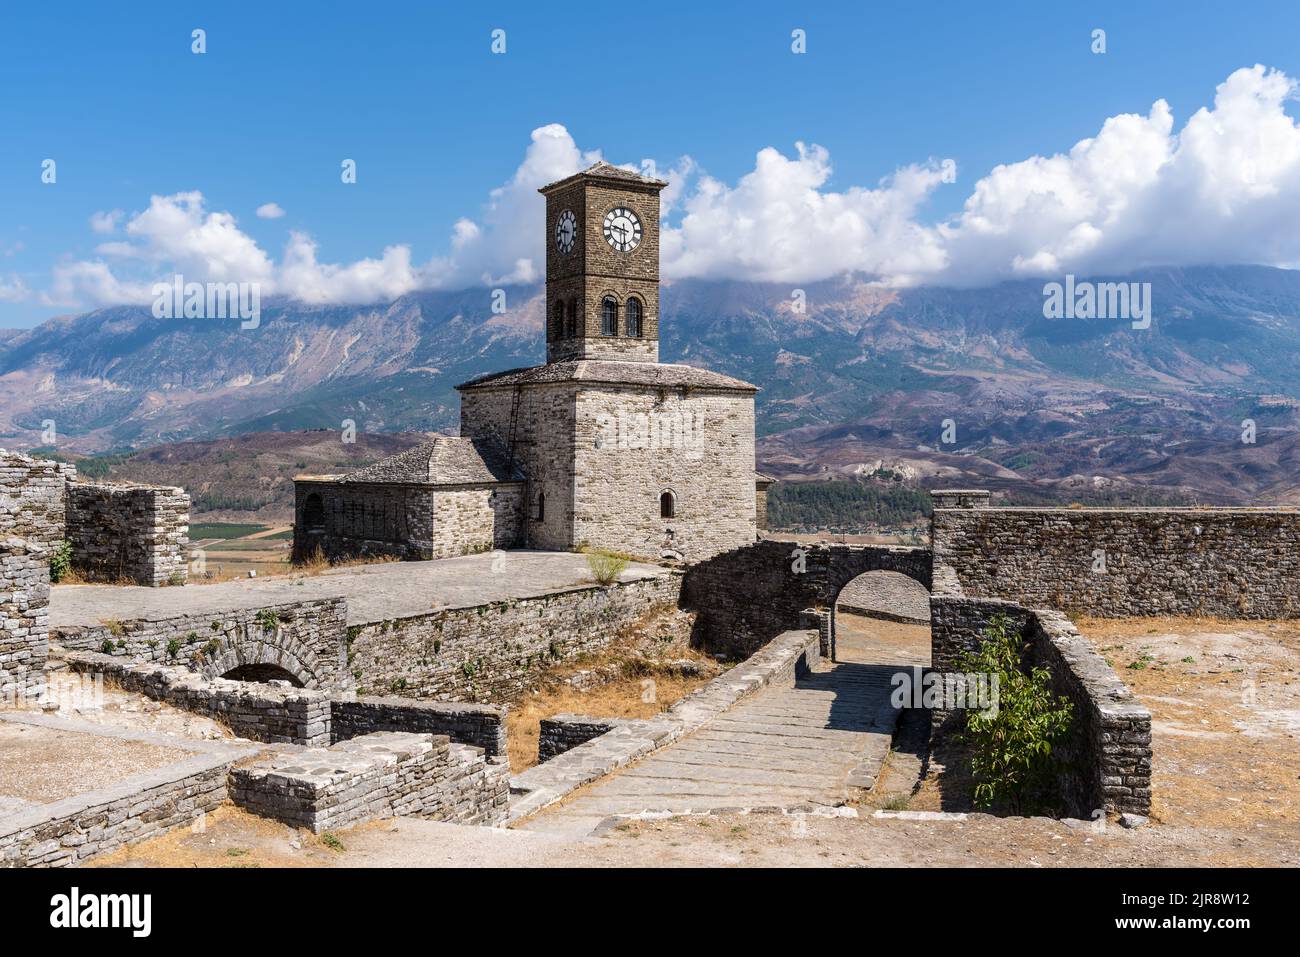 Clock tower and fortress at Gjirokaster, a beautiful town in Albania where the Ottoman legacy is clearly visible Stock Photo